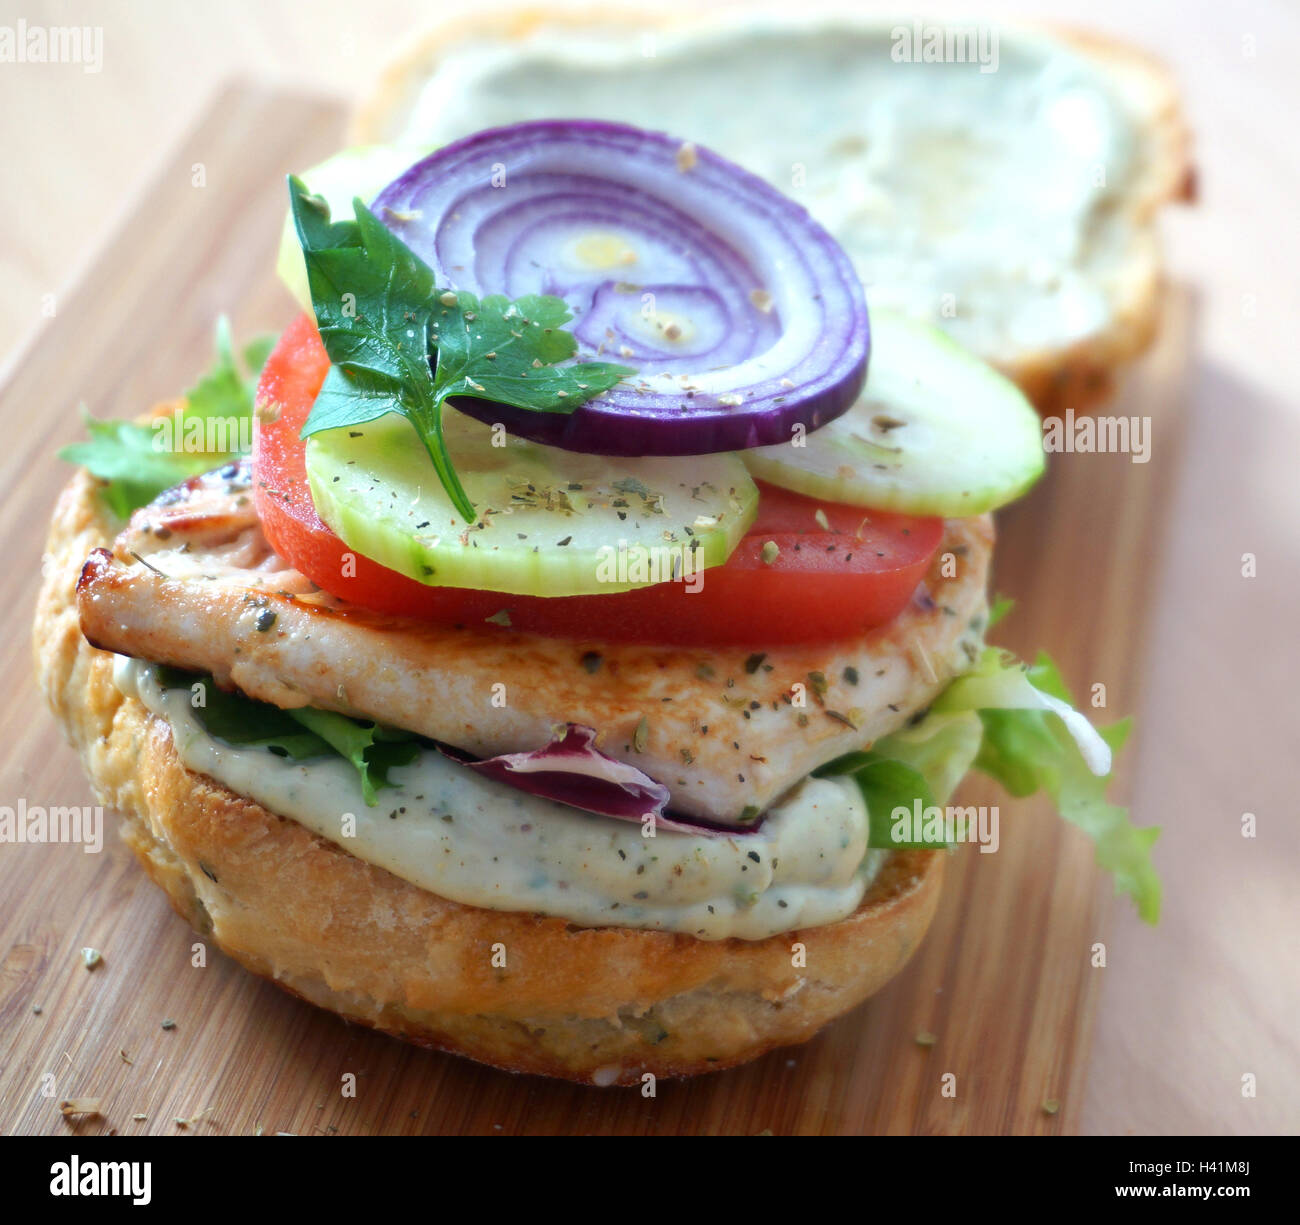 Delicious burger with chicken and vegetables. Stock Photo